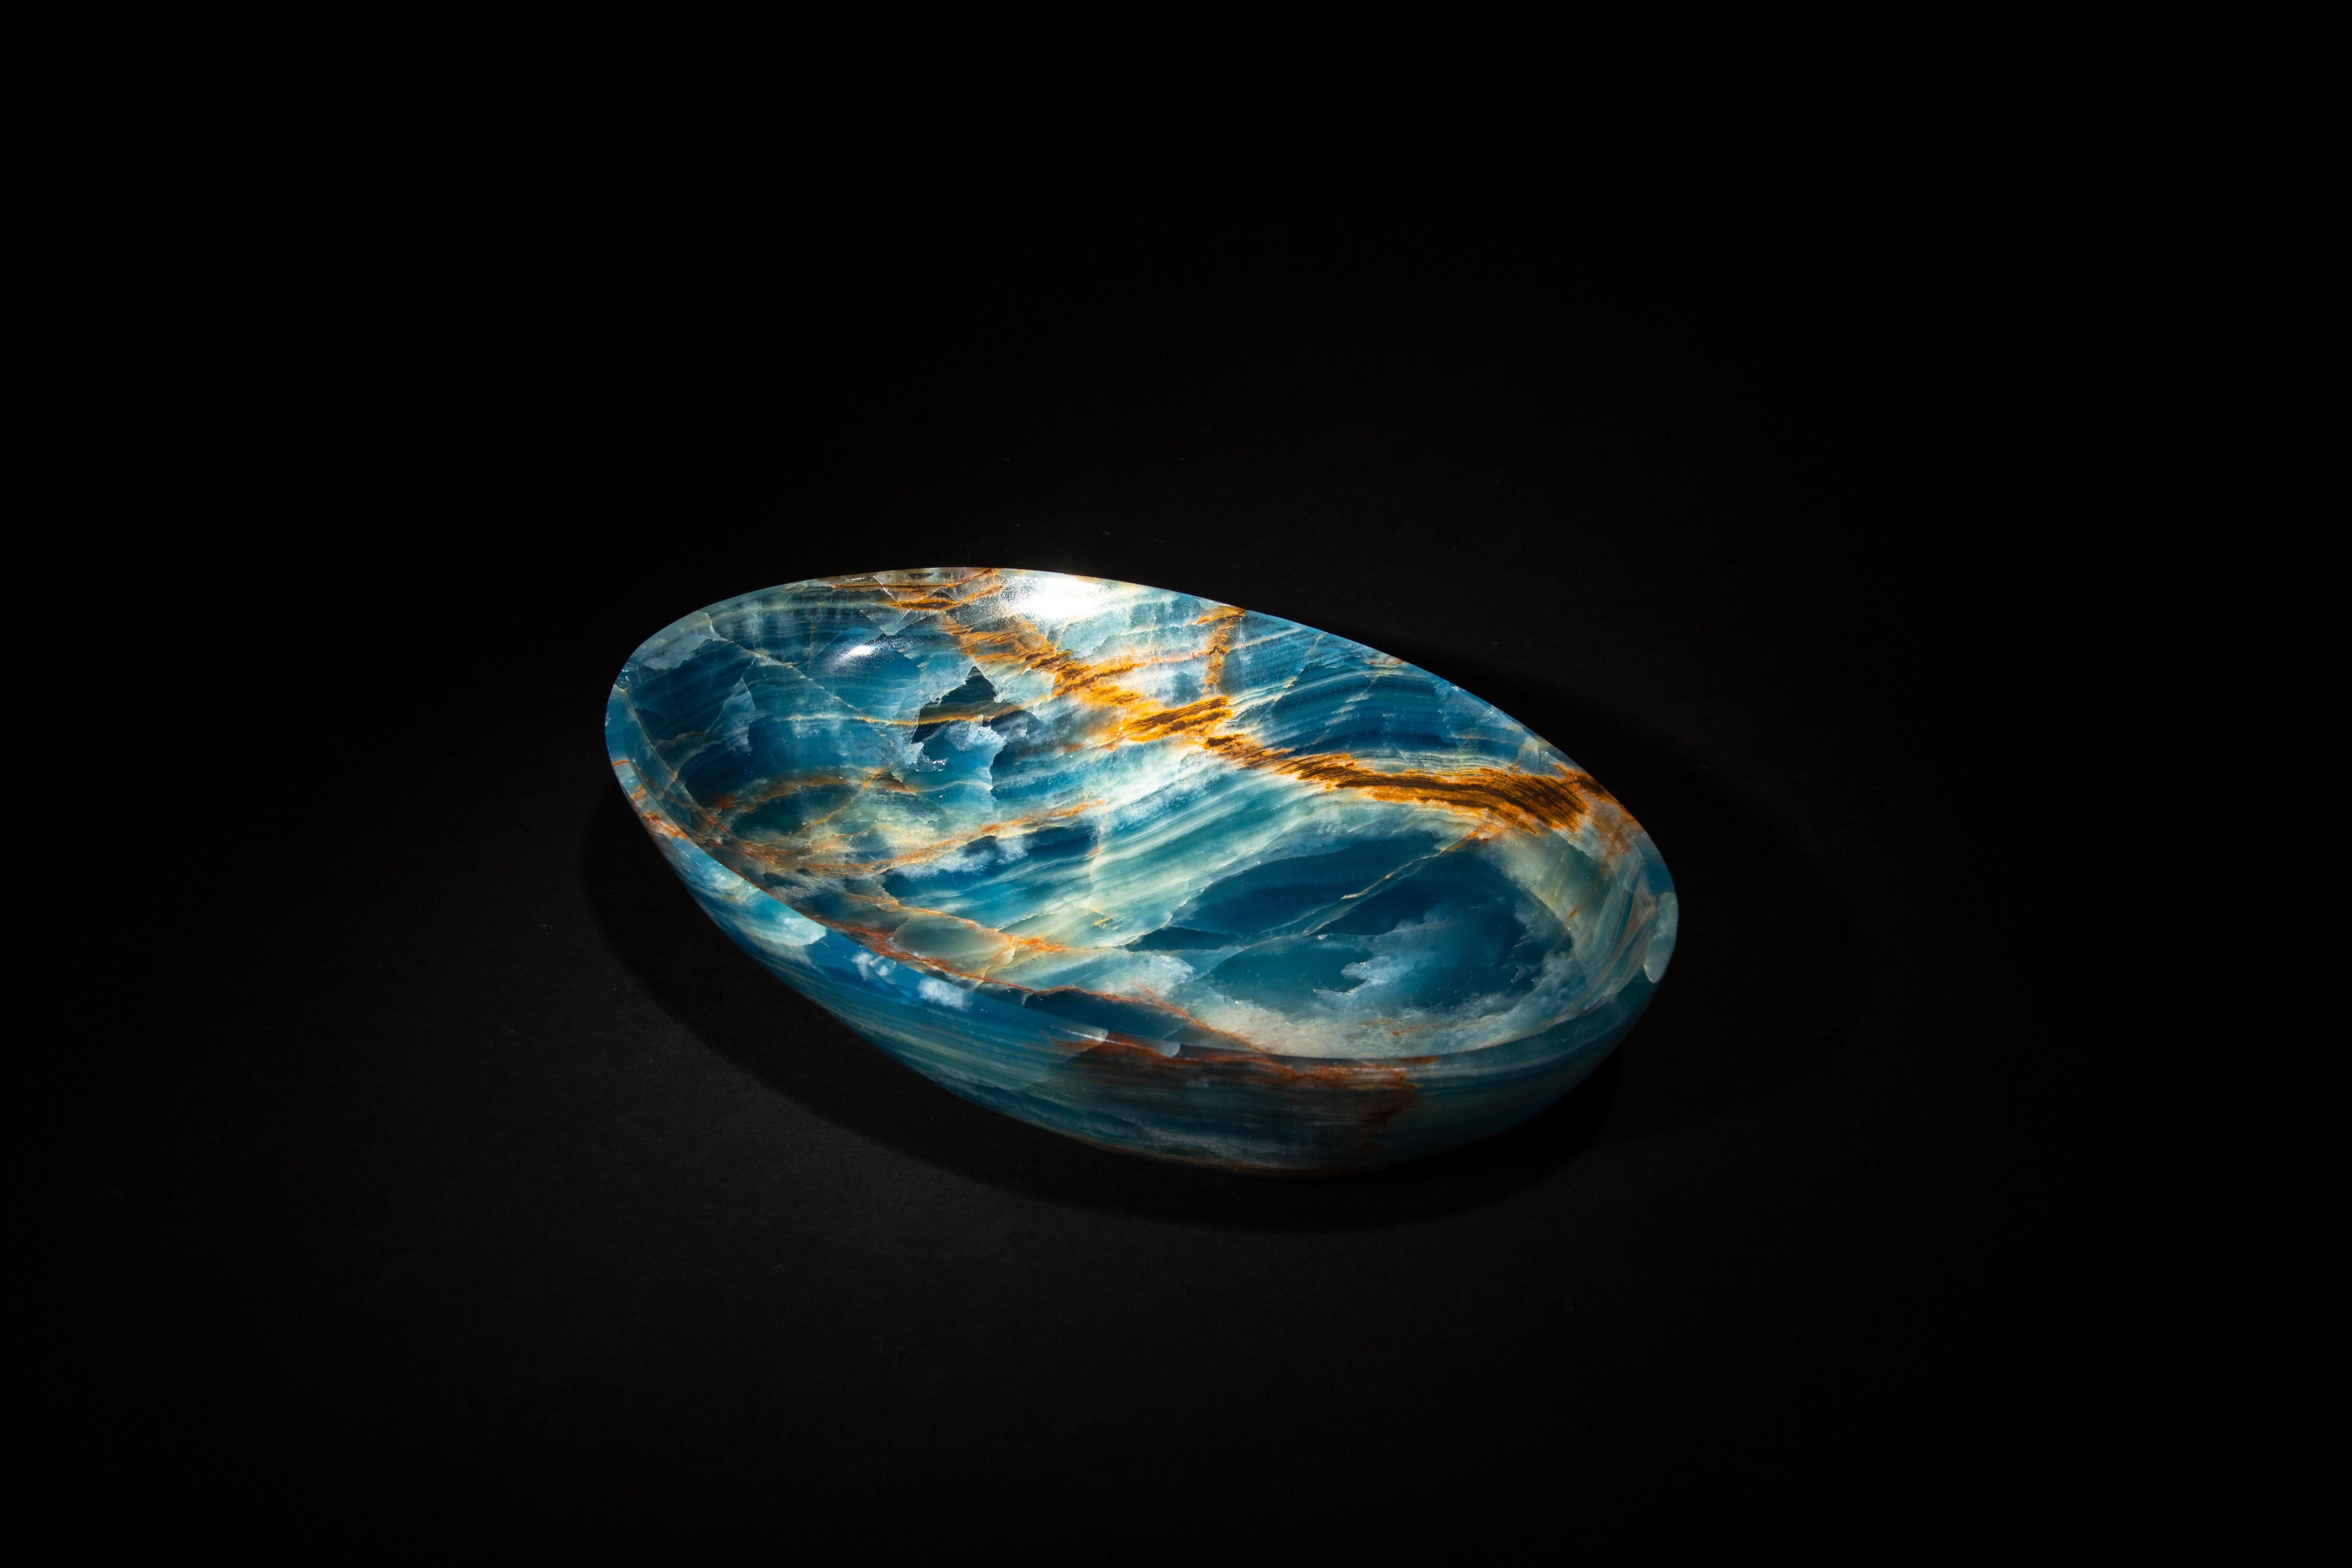 This Blue Onyx Vide Poche is an embodiment of sophistication and rare beauty. Measuring 9.25 inches by 6.25 inches with a height of 2 inches, it is crafted from richly veined blue onyx, a stone cherished for its striking coloration and smooth